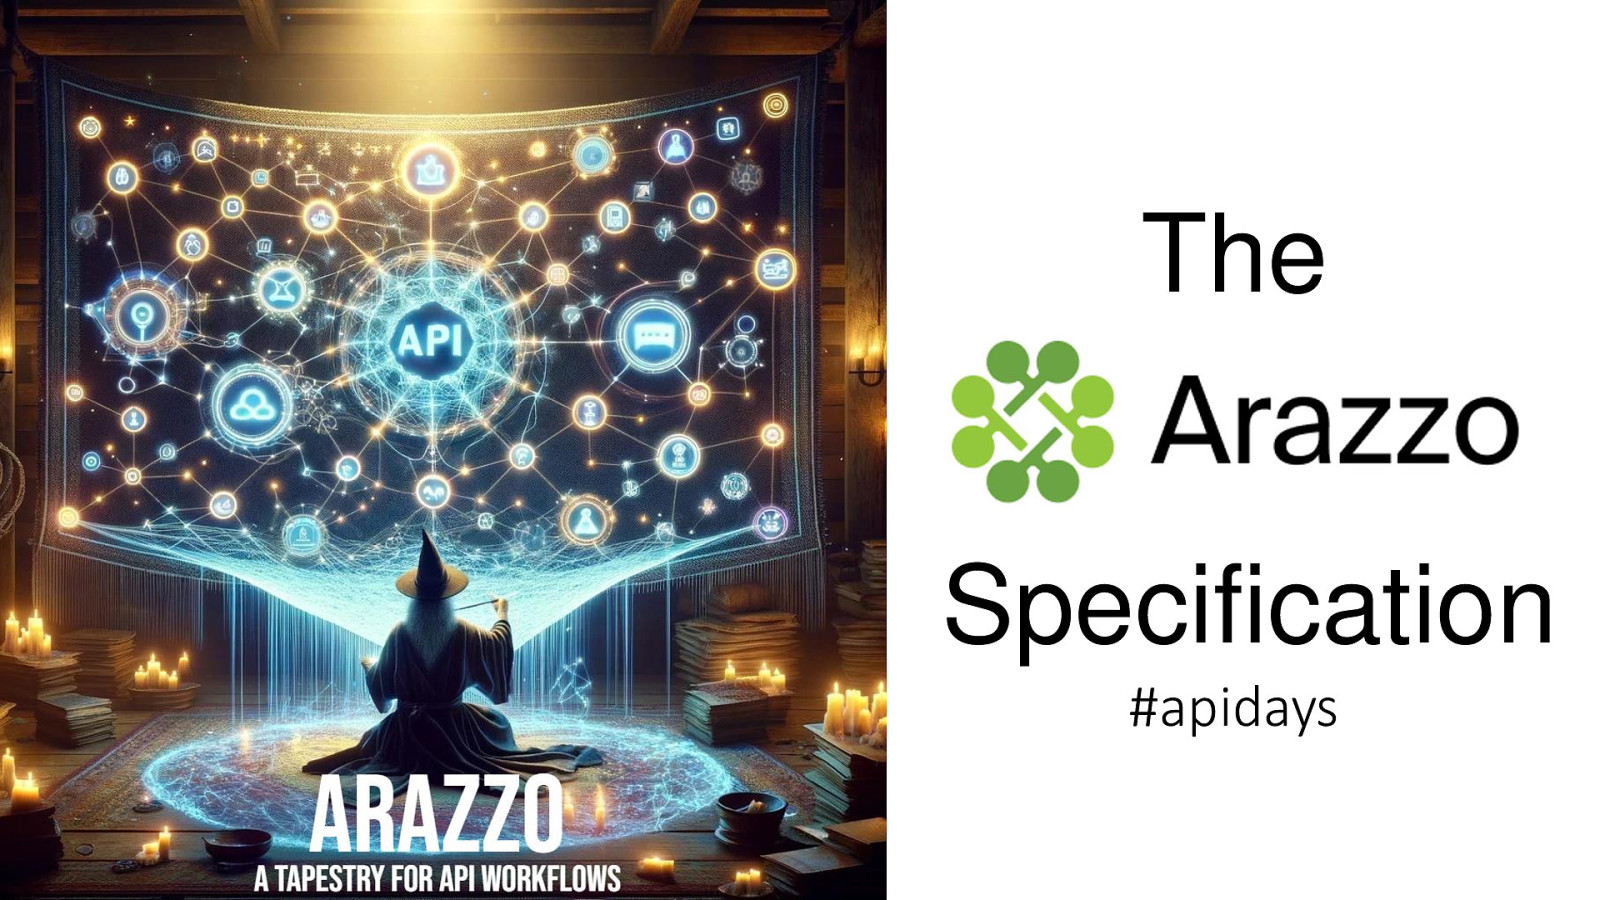 The Arazzo Specification: A Tapestry for API Workflows